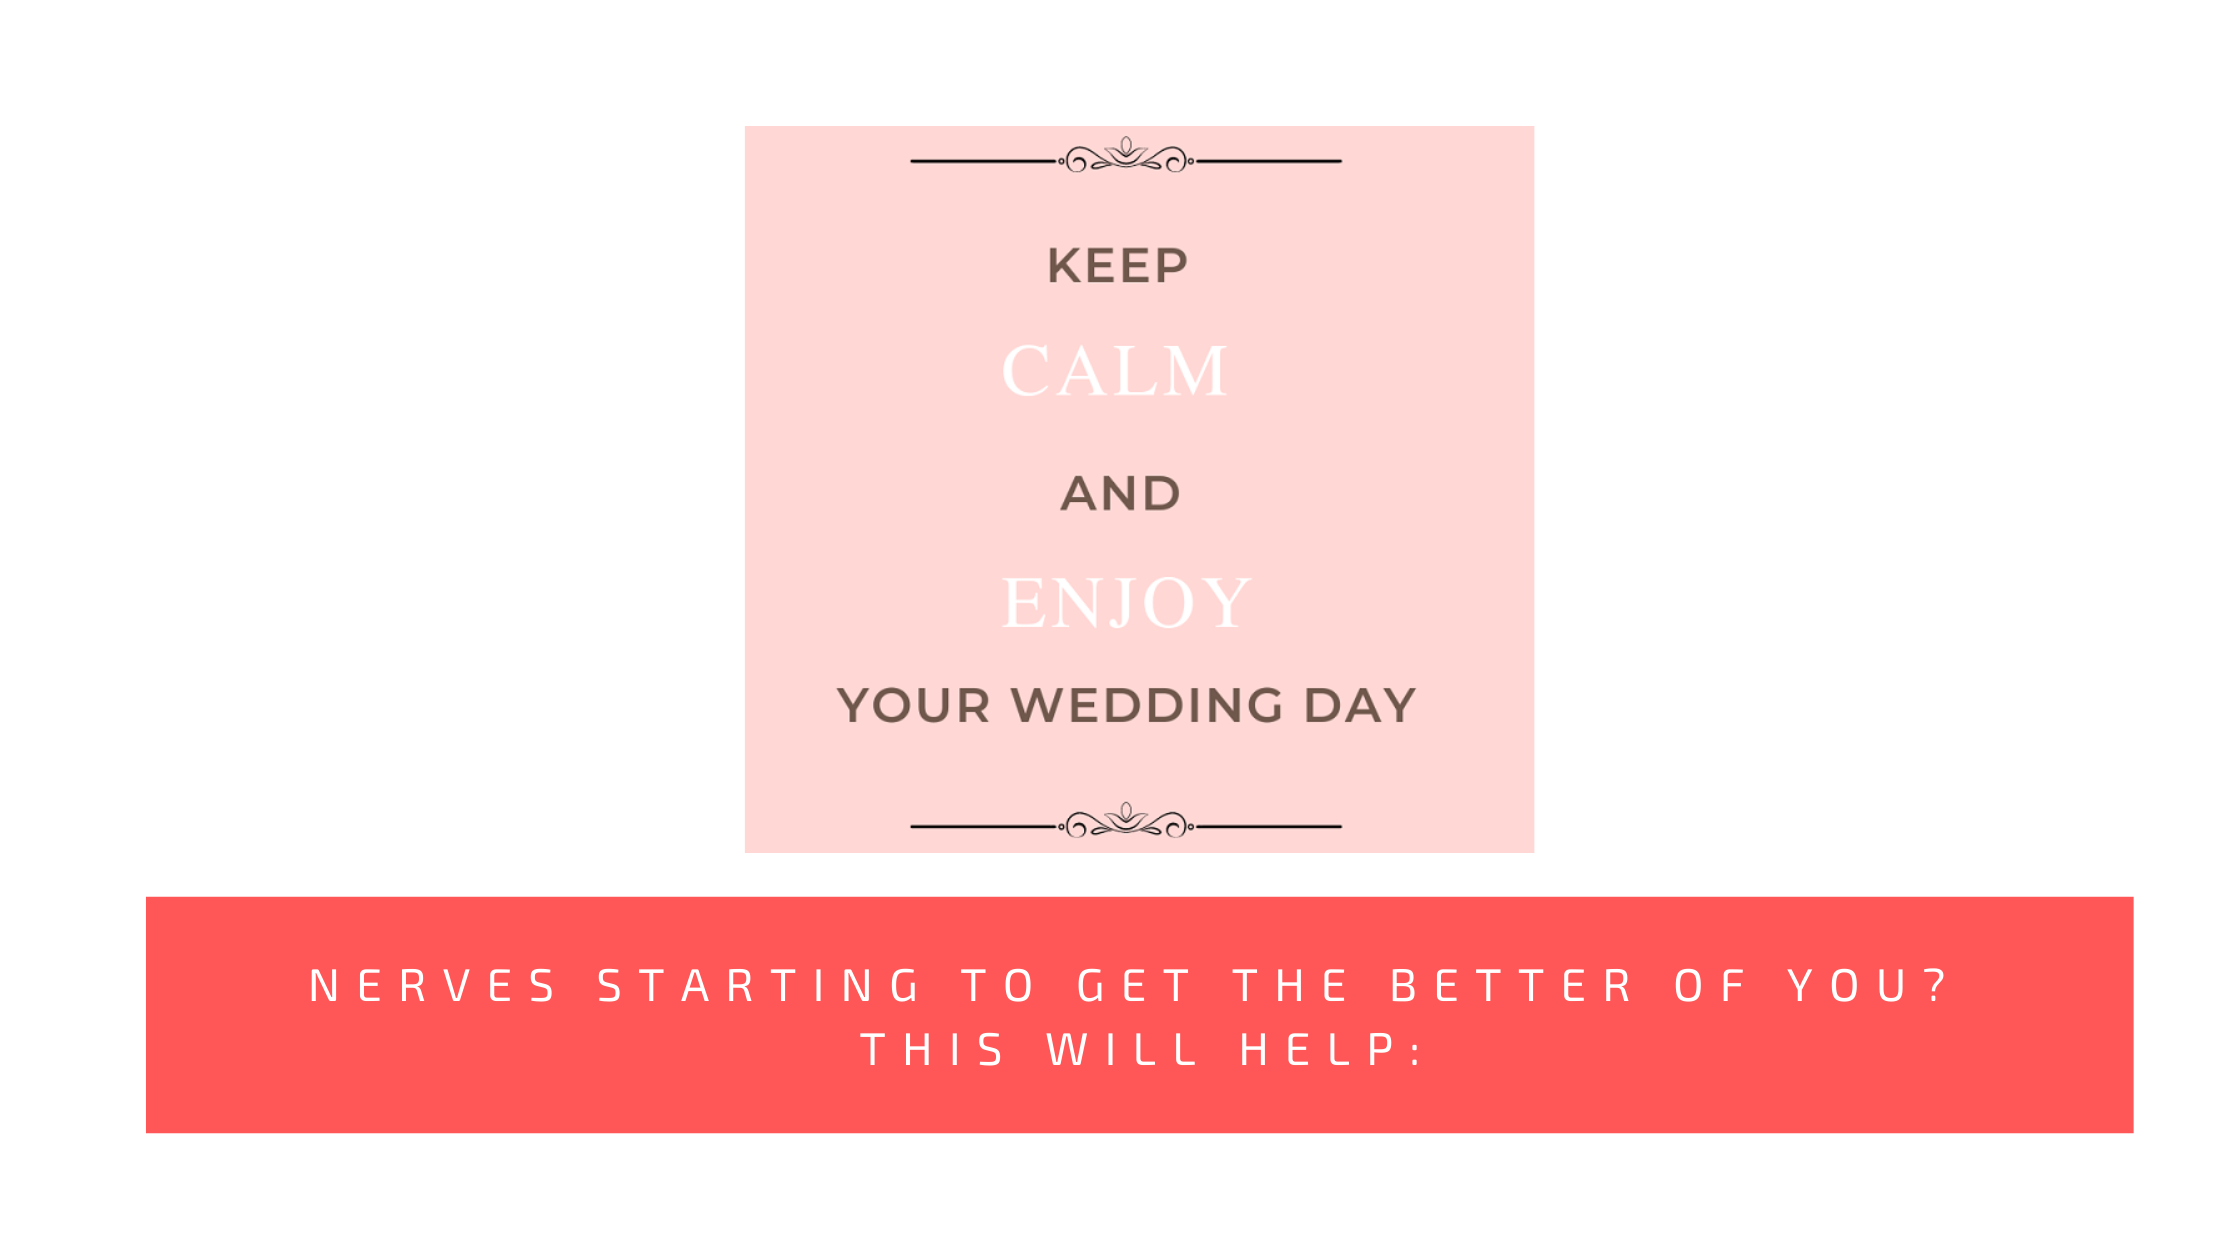 Nerves starting to get the better of you before your wedding? This will help: